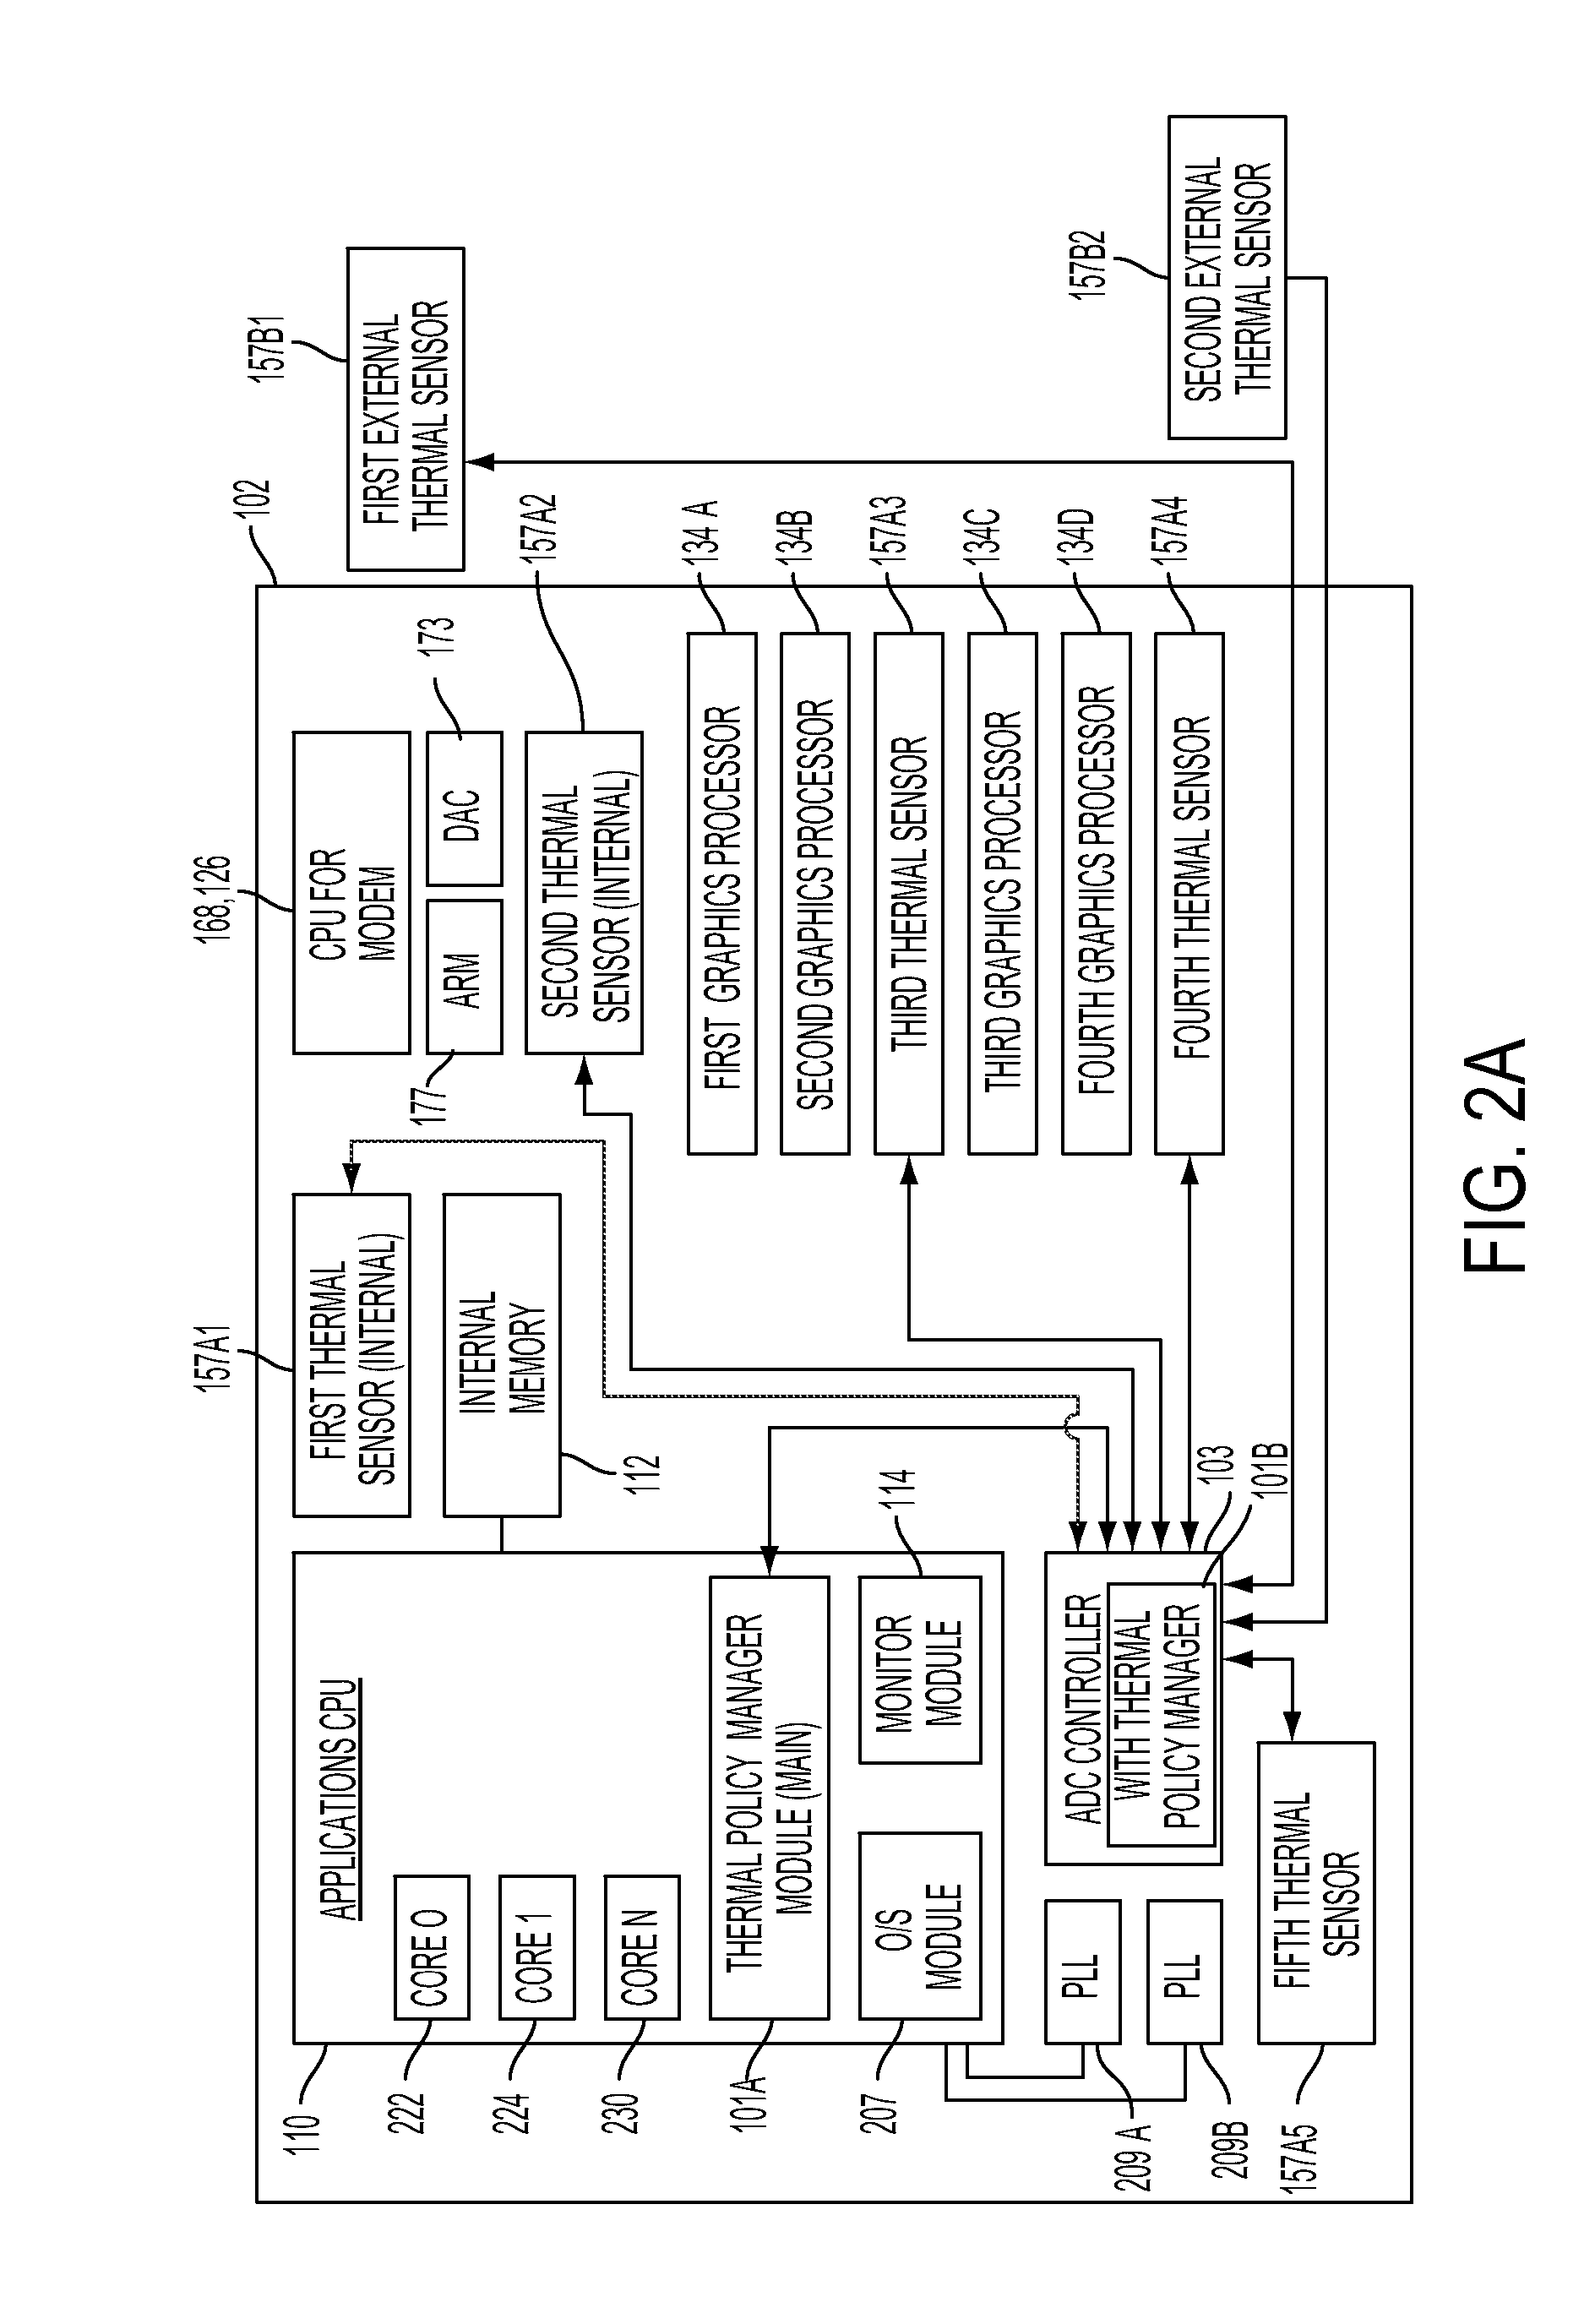 Method and system for managing thermal policies of a portable computing device